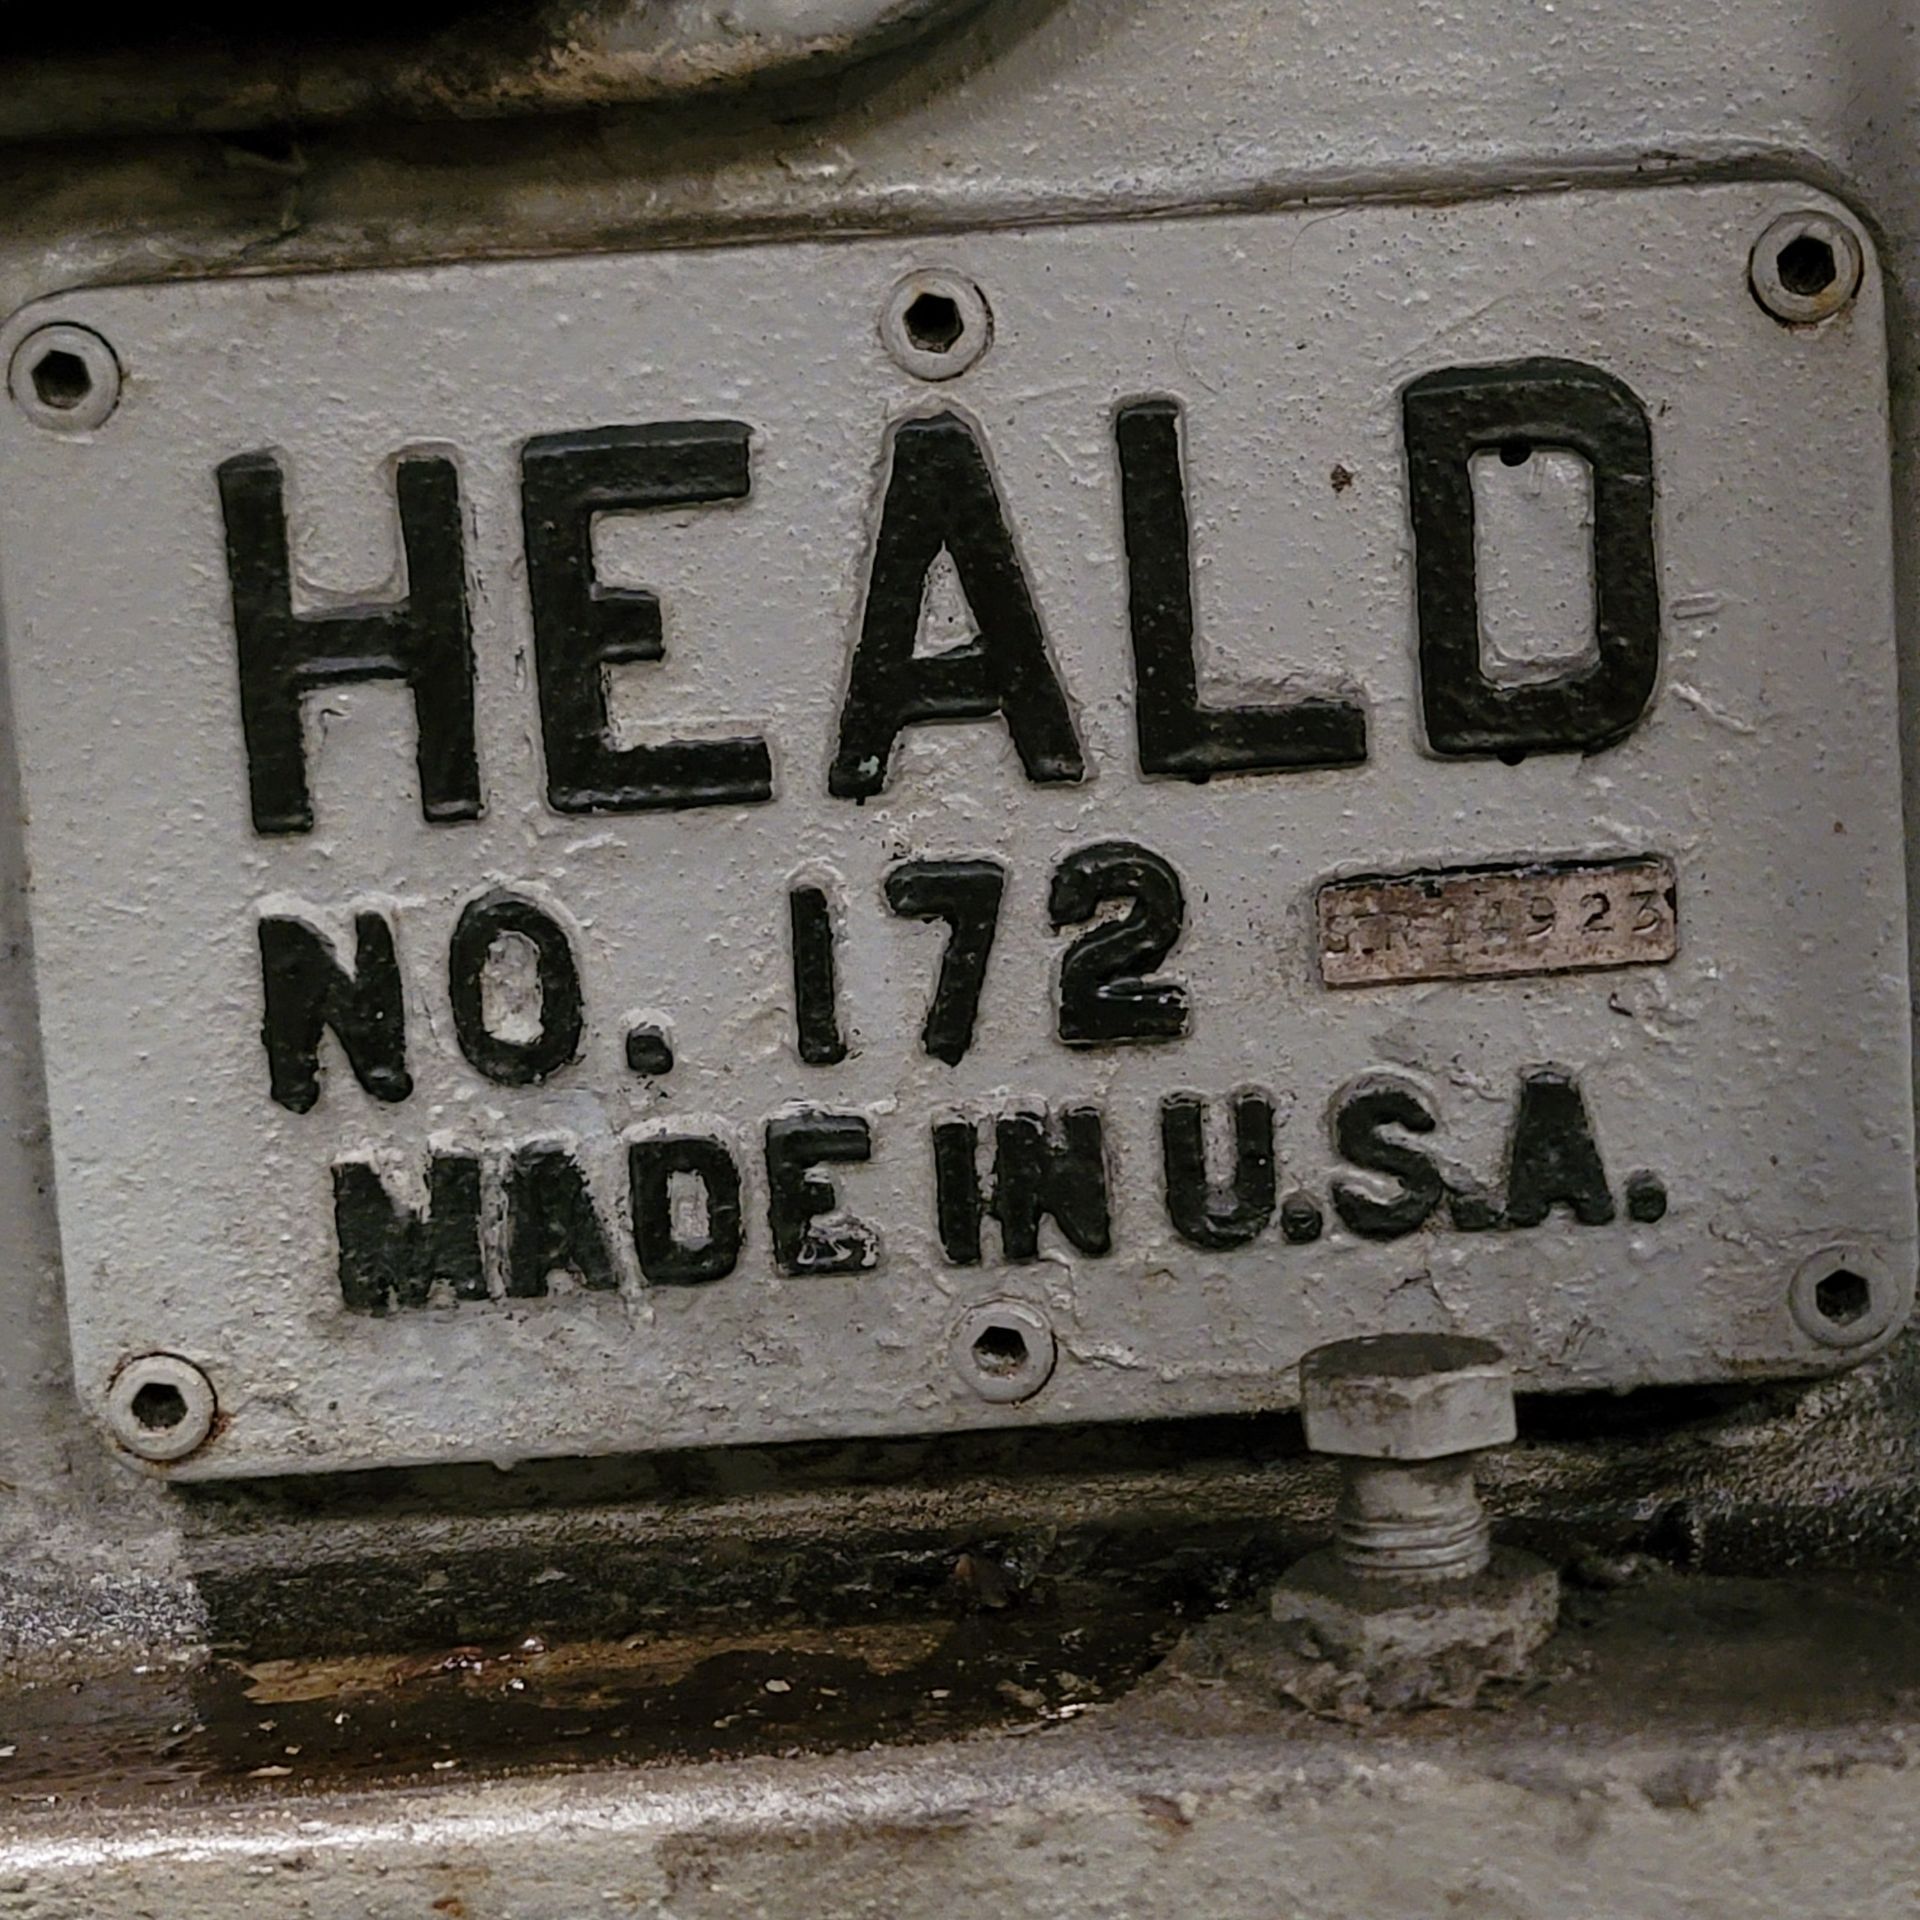 HEALD NO. 172 ID GRINDER, 35" FACE PLATE, S/N 14923 - Image 4 of 4